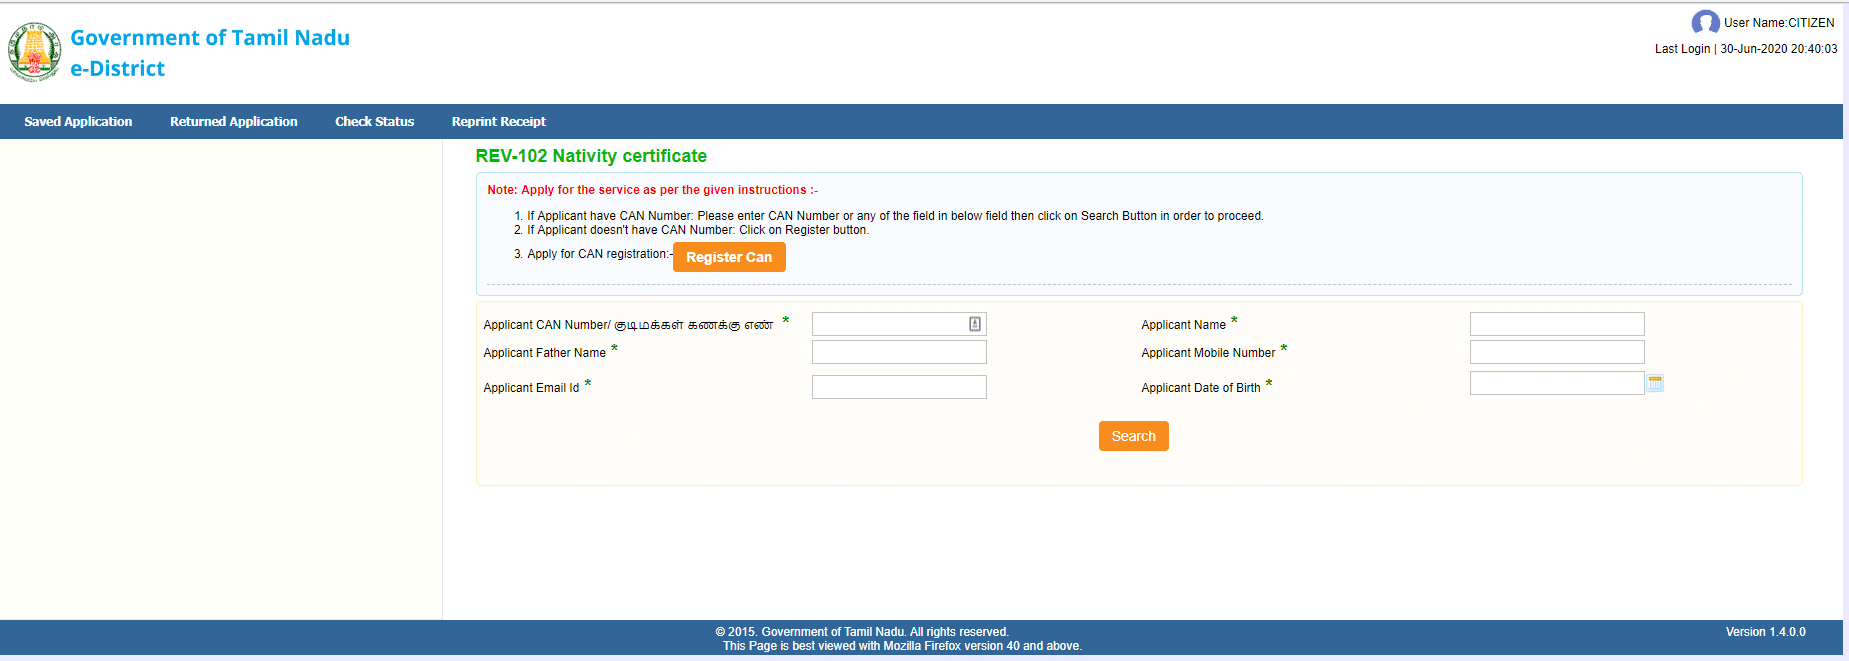 register can or search can number